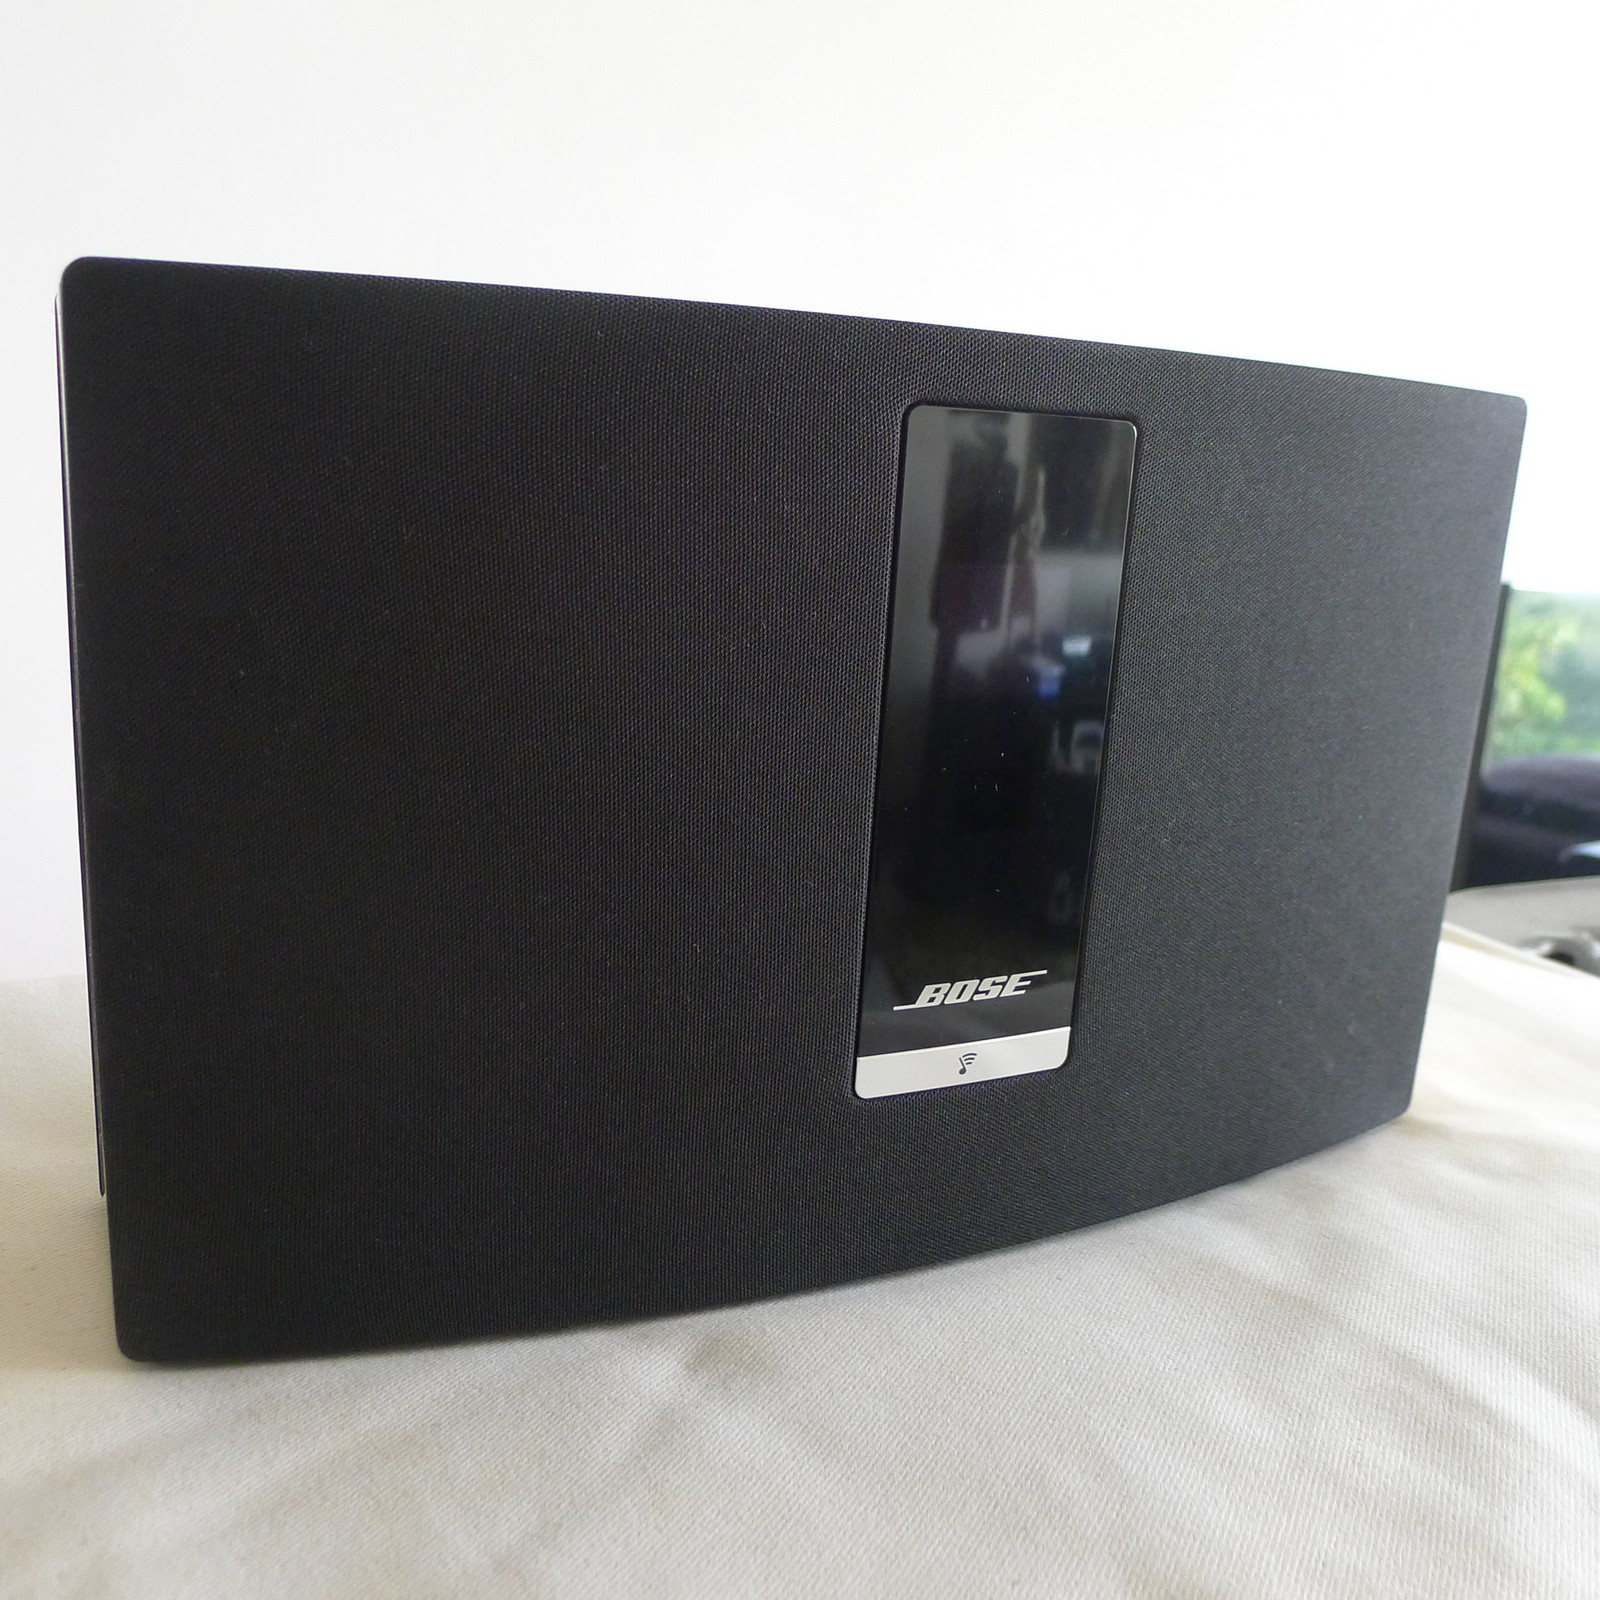 soundtouch 20 series 3 review